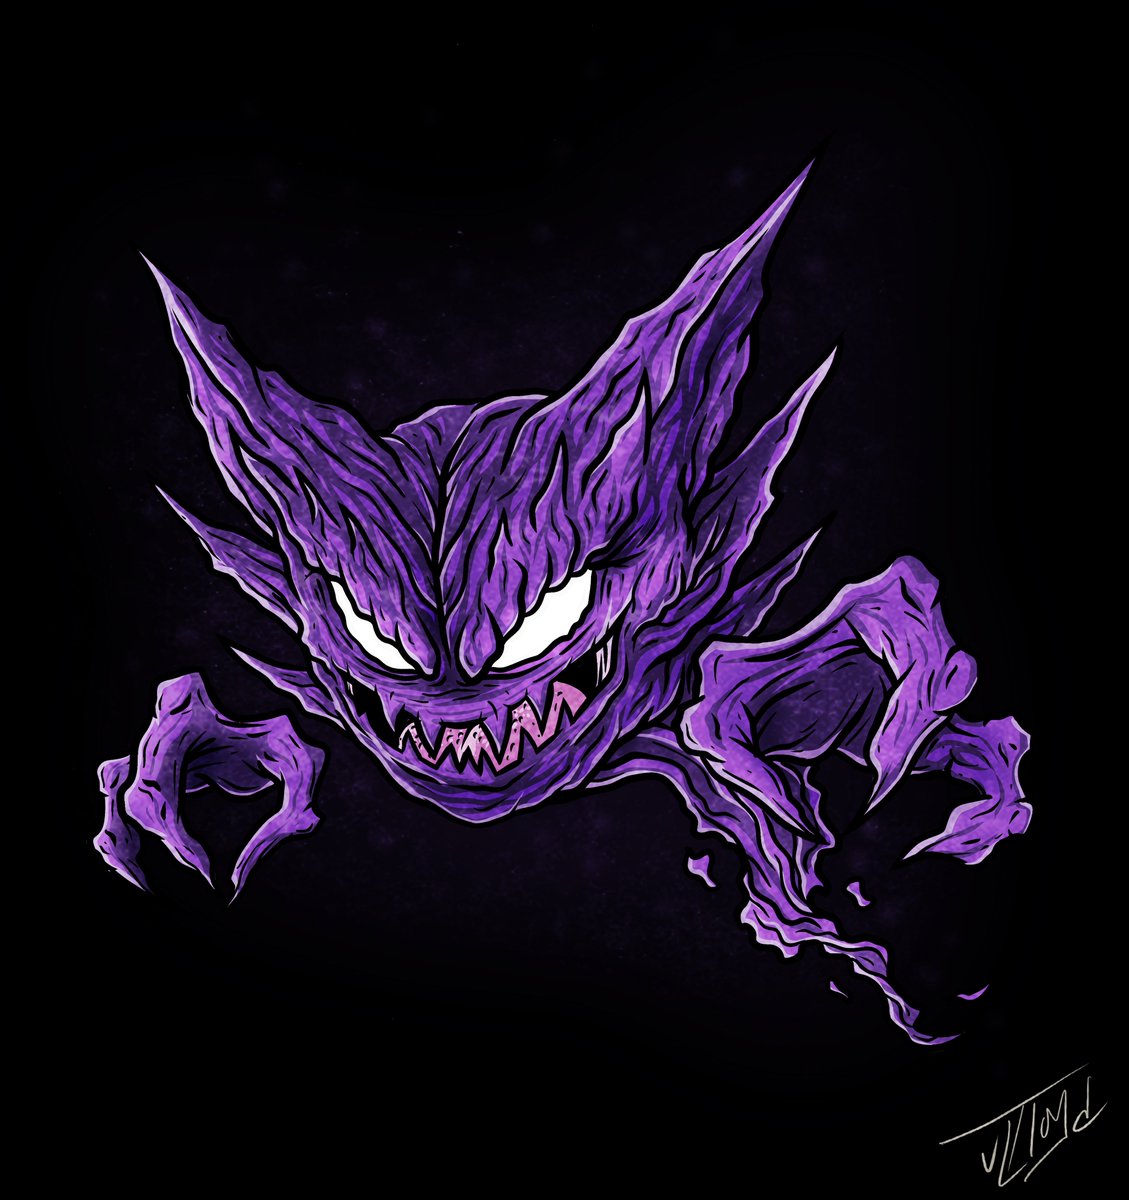 Haunter art I did a while back. DM for commissions #Pokemon #fanart #commissions #Nintendo